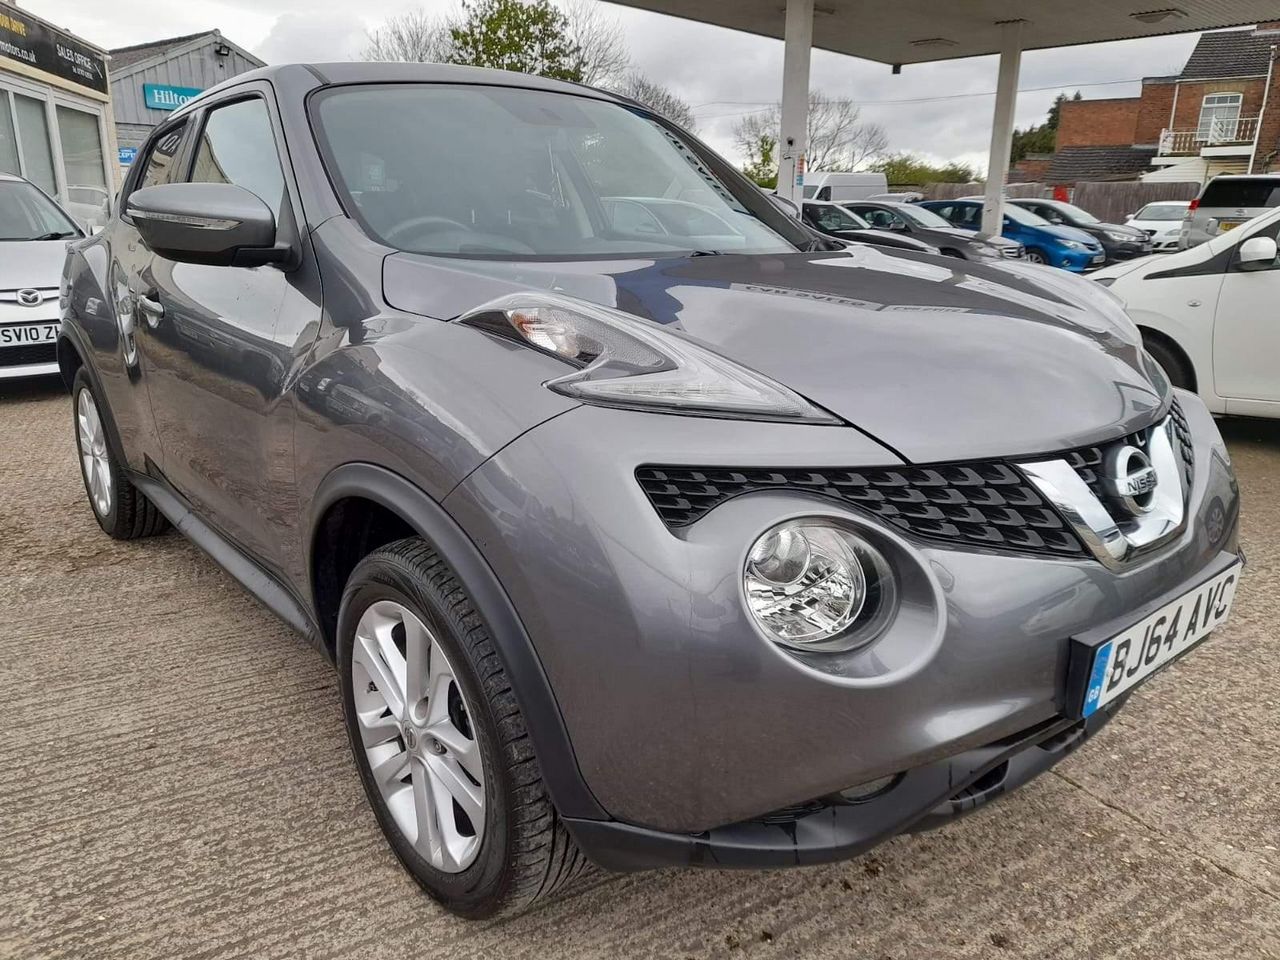 2014 Nissan Juke 1.5 dCi 8v Acenta Euro 5 (s/s) 5dr - Picture 3 of 48